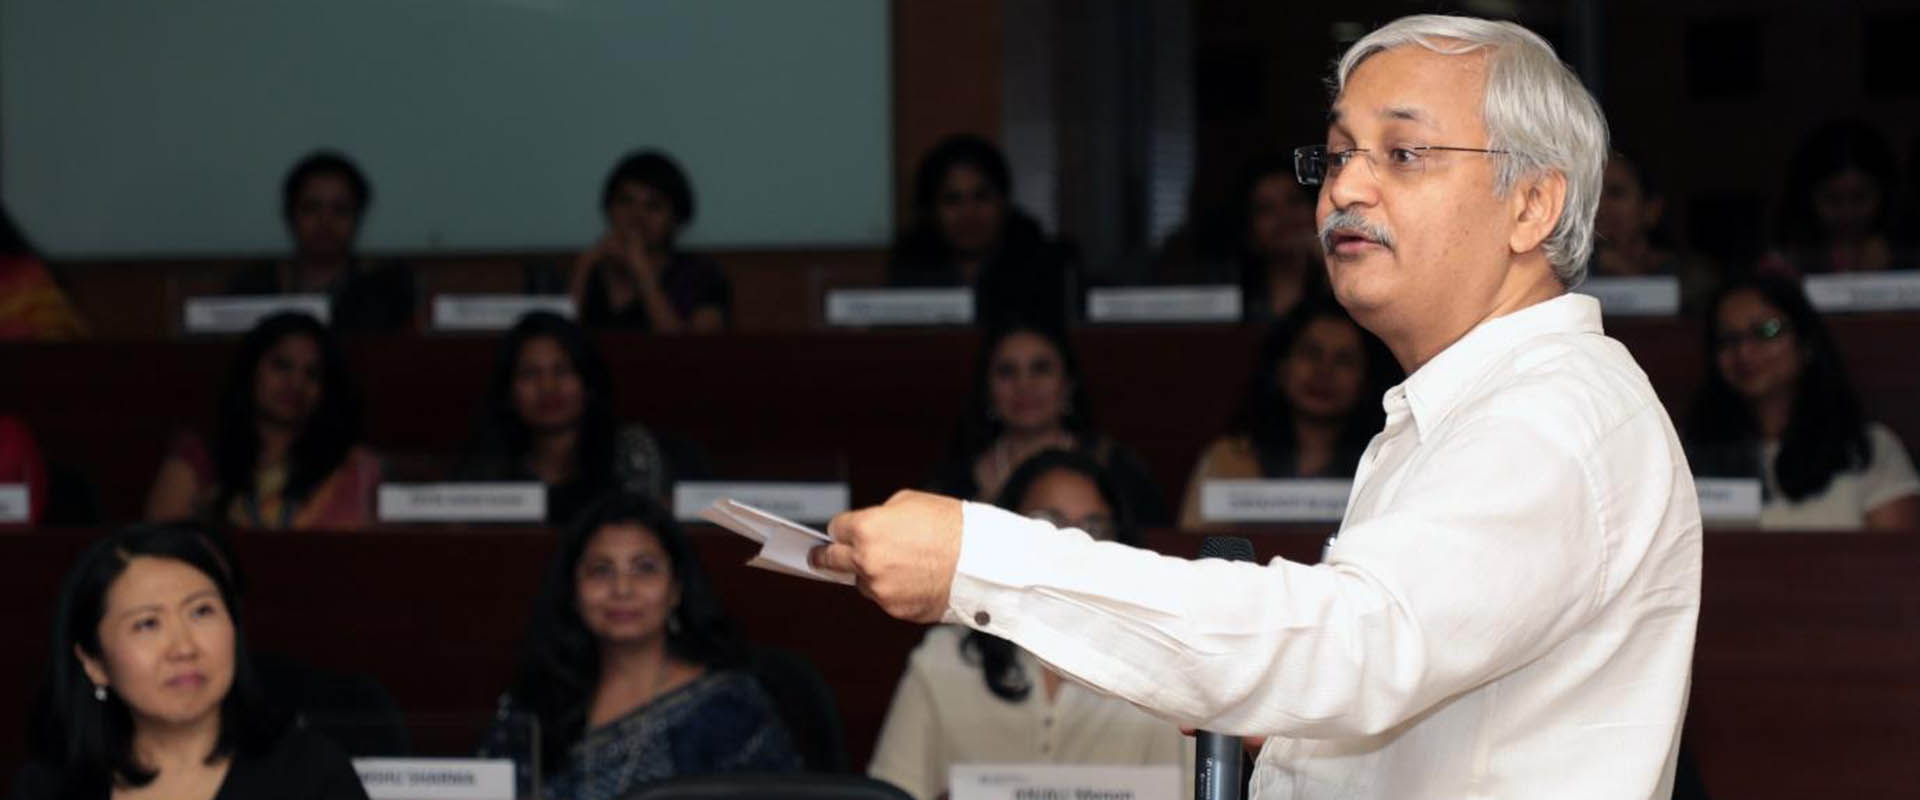 Prof. Suresh Bhagavatula, Chair, NSRCEL at IIMB, welcomes participants of the Goldman Sachs 10,000 Women Program at IIMB to the graduation ceremony on March 08, 2019. 